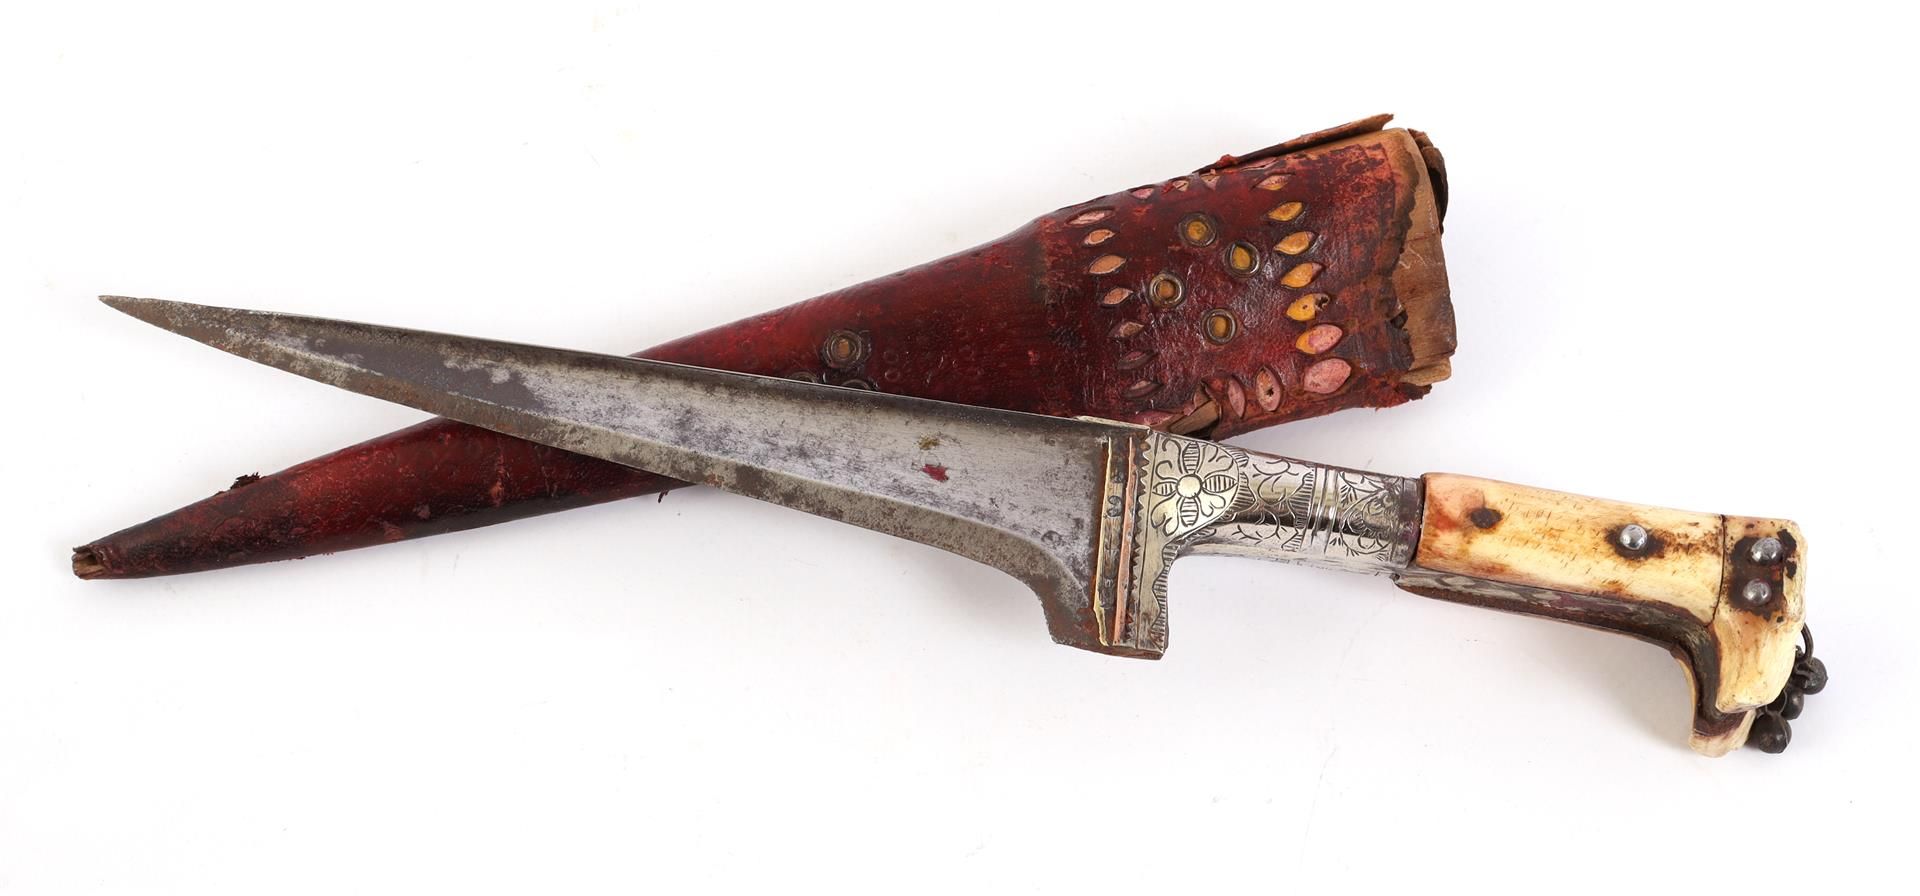 Indo-Persian dagger Pesh-Kabz. Strong blade and hilt of decorated light metal and bone. The wooden s